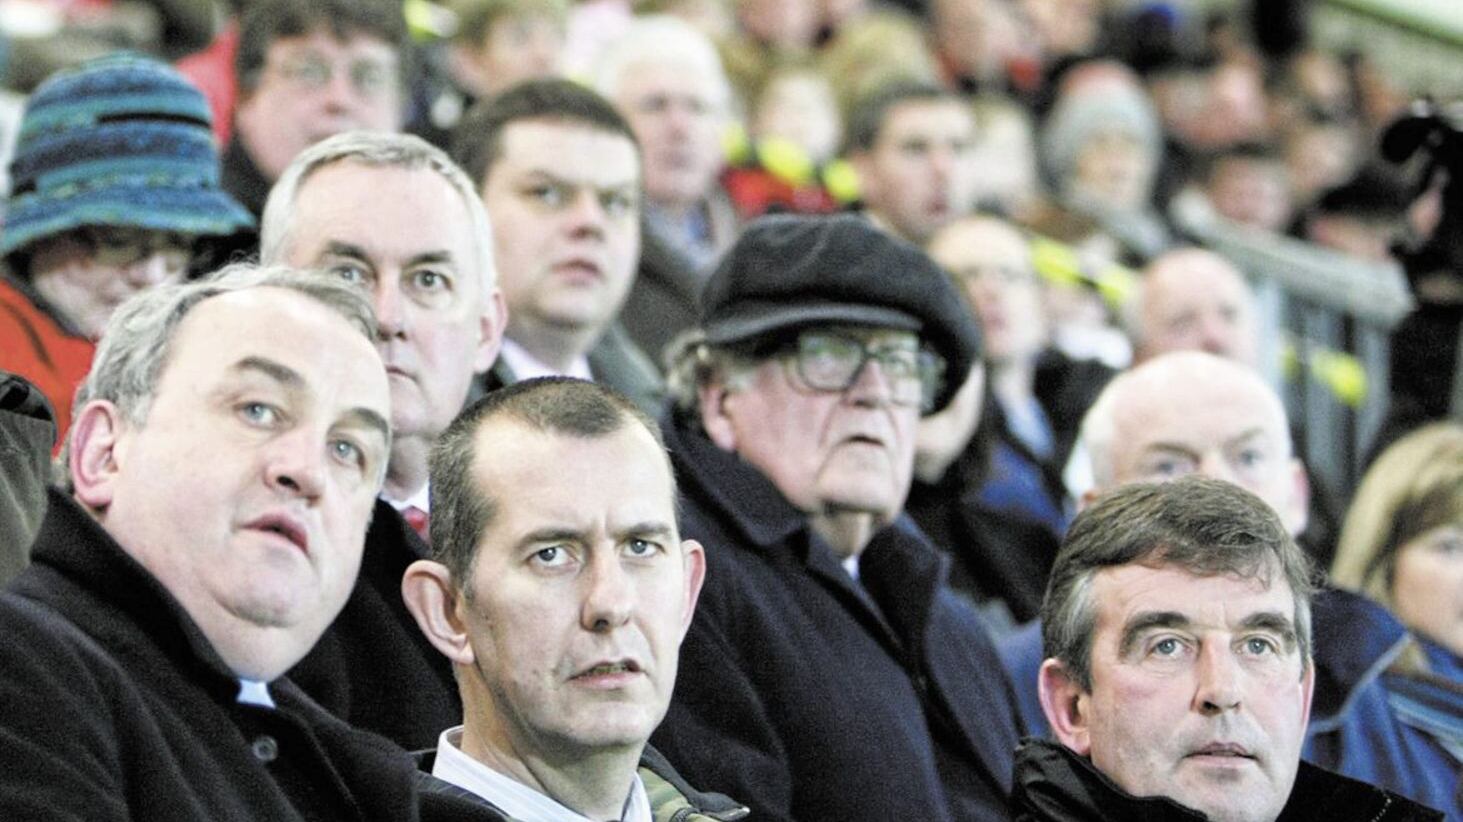 Sports minster Edwin Poots, GAA president Nicky Brennan and Ulster GAA president Tom Daly in the stand looking goalward at Pairc Esler in Newry for the Donegal v Down game in 2008 